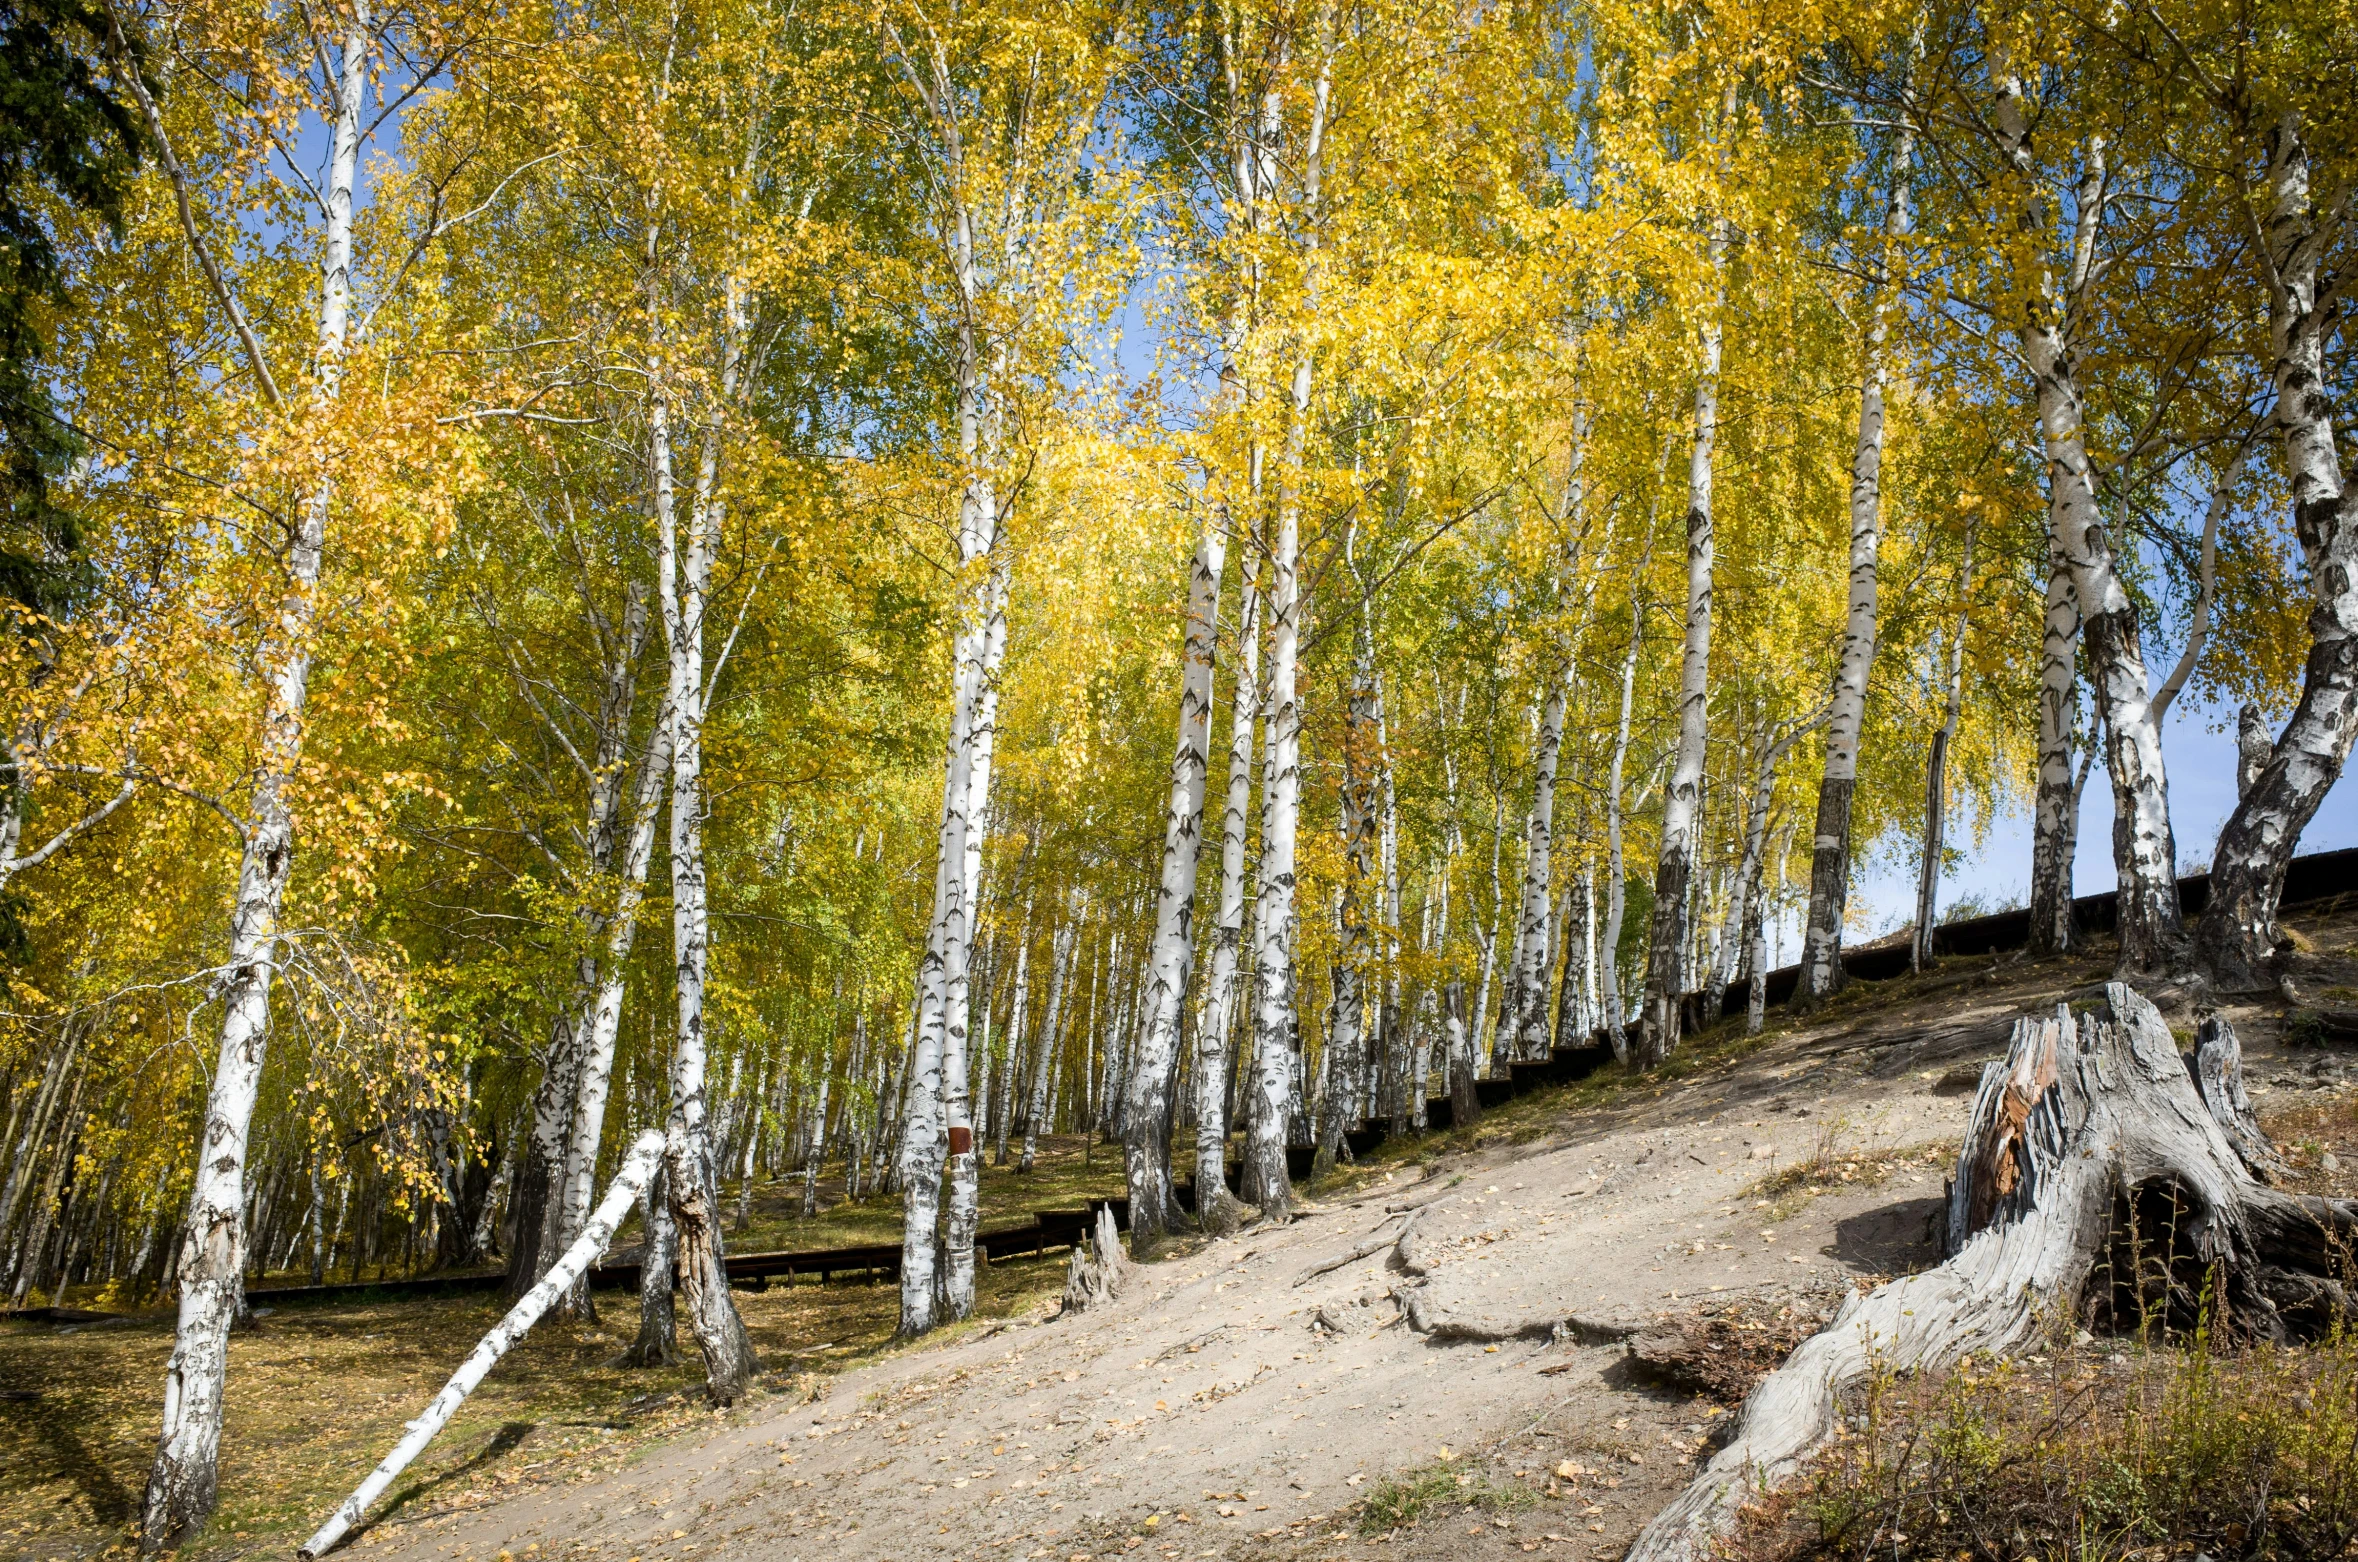 a number of trees on a hill side near trees with yellow leaves